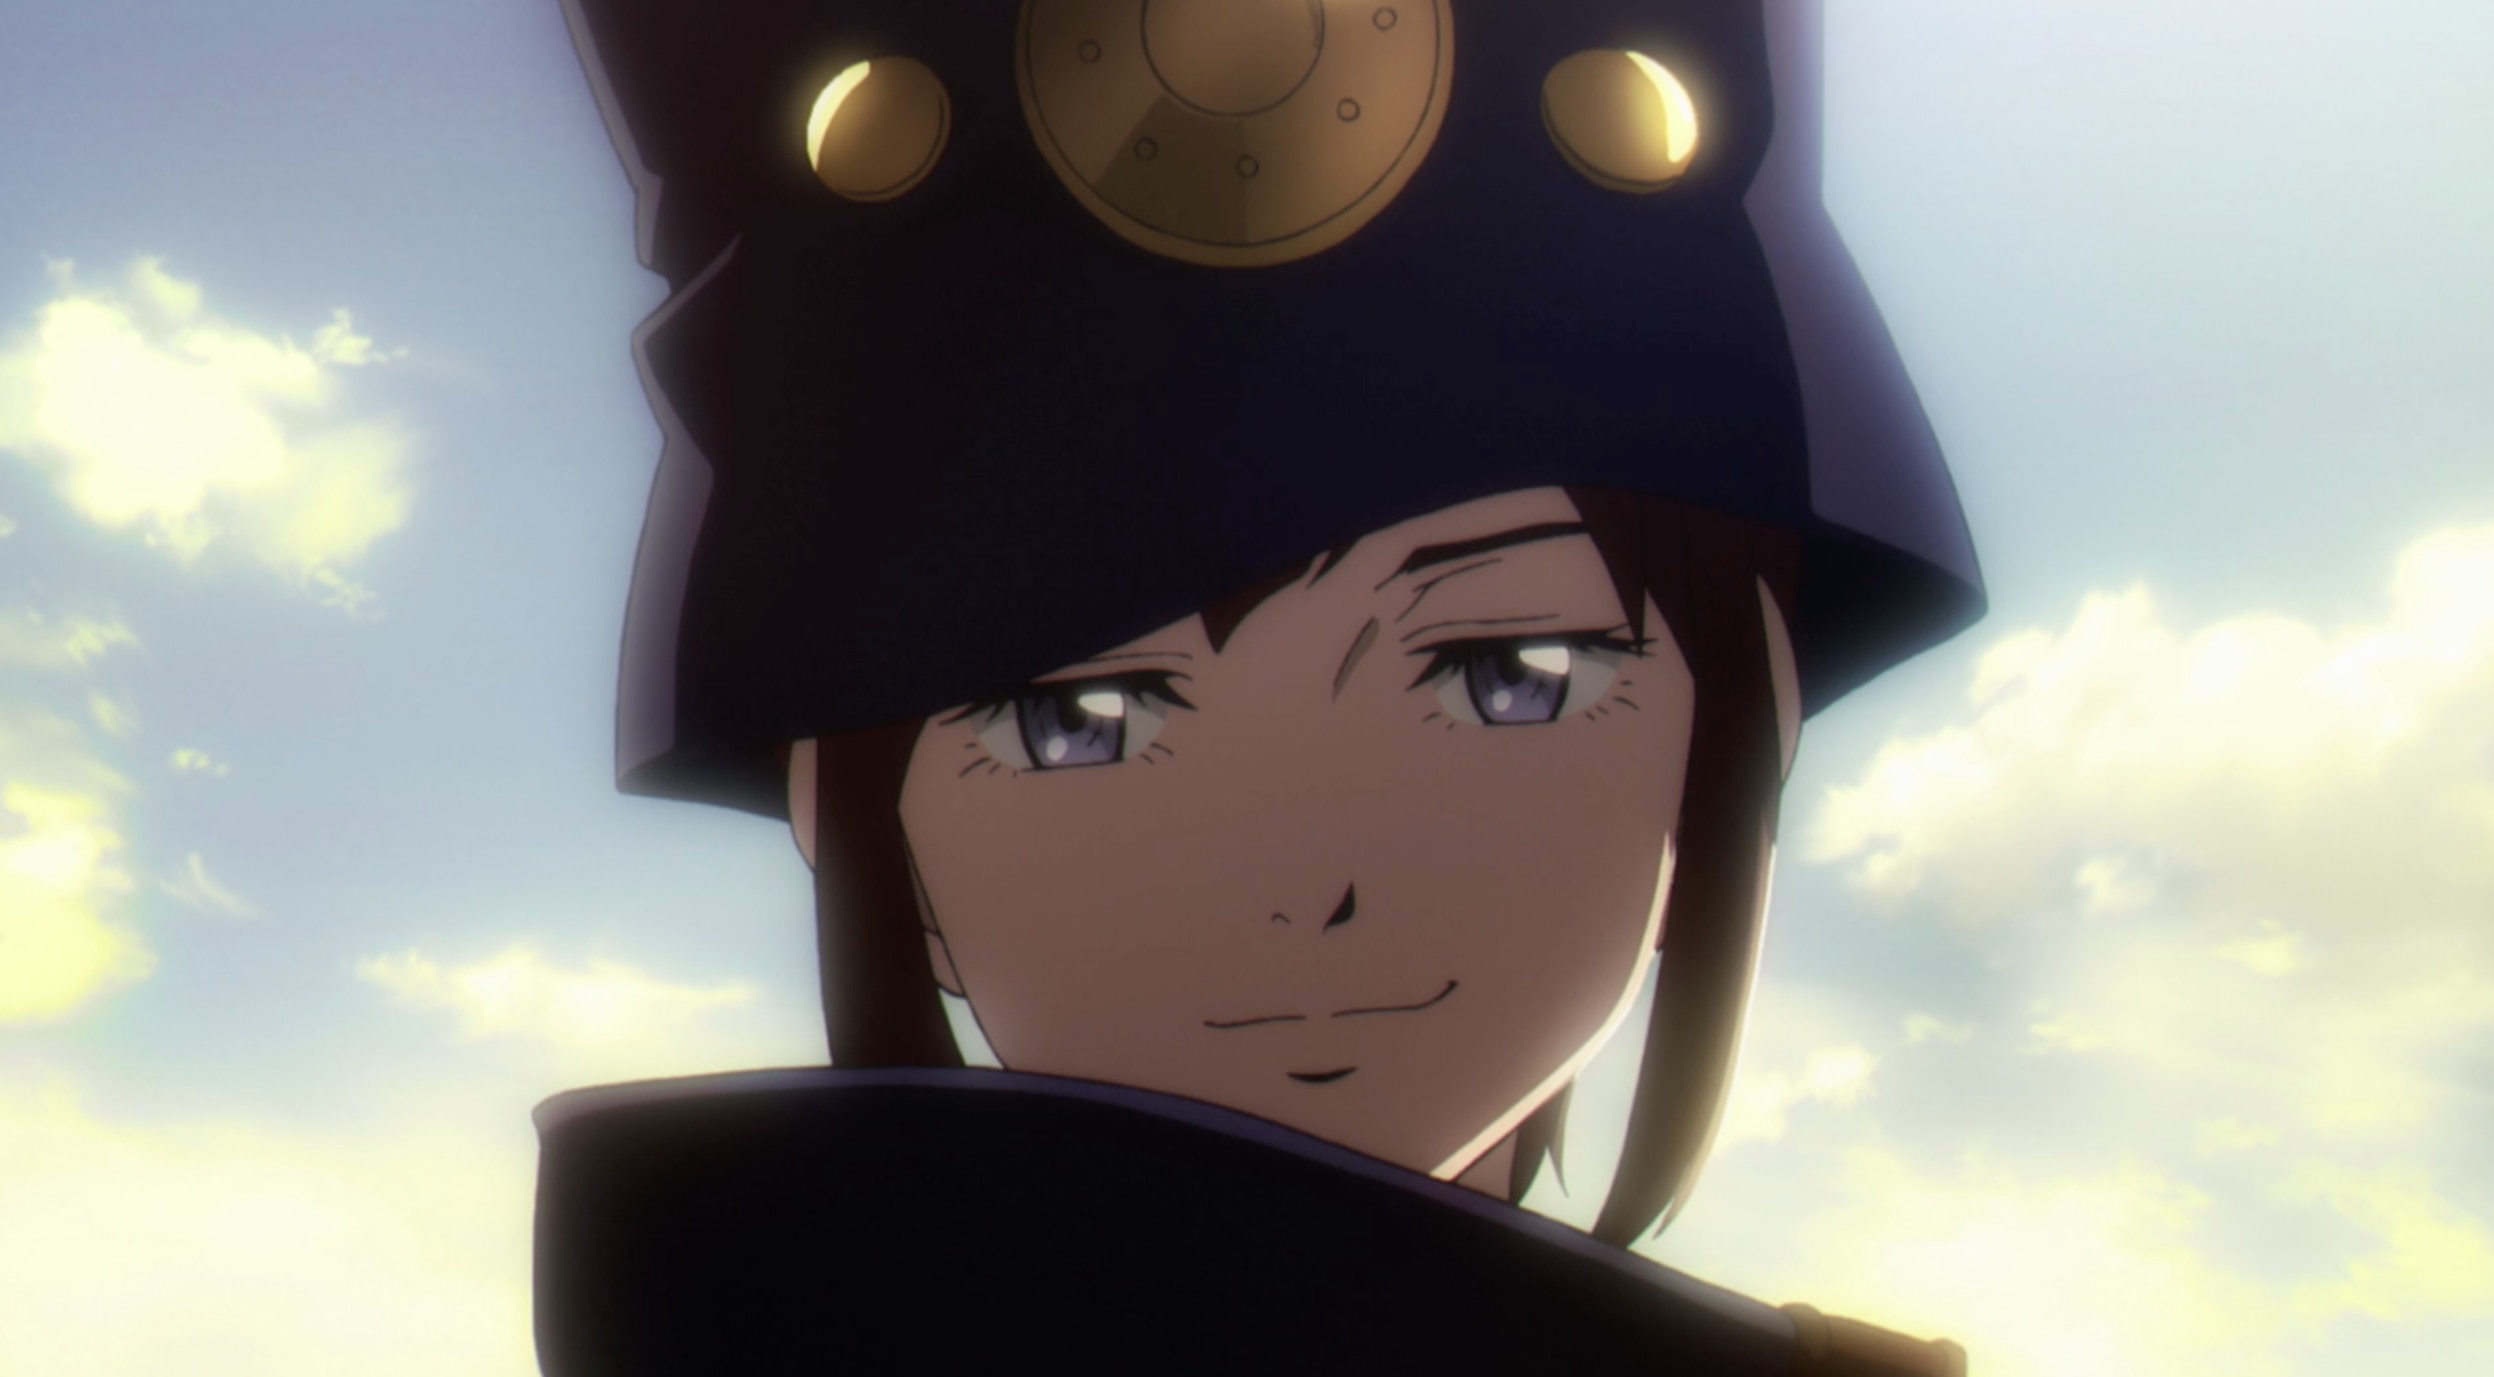 Boogiepop and Others